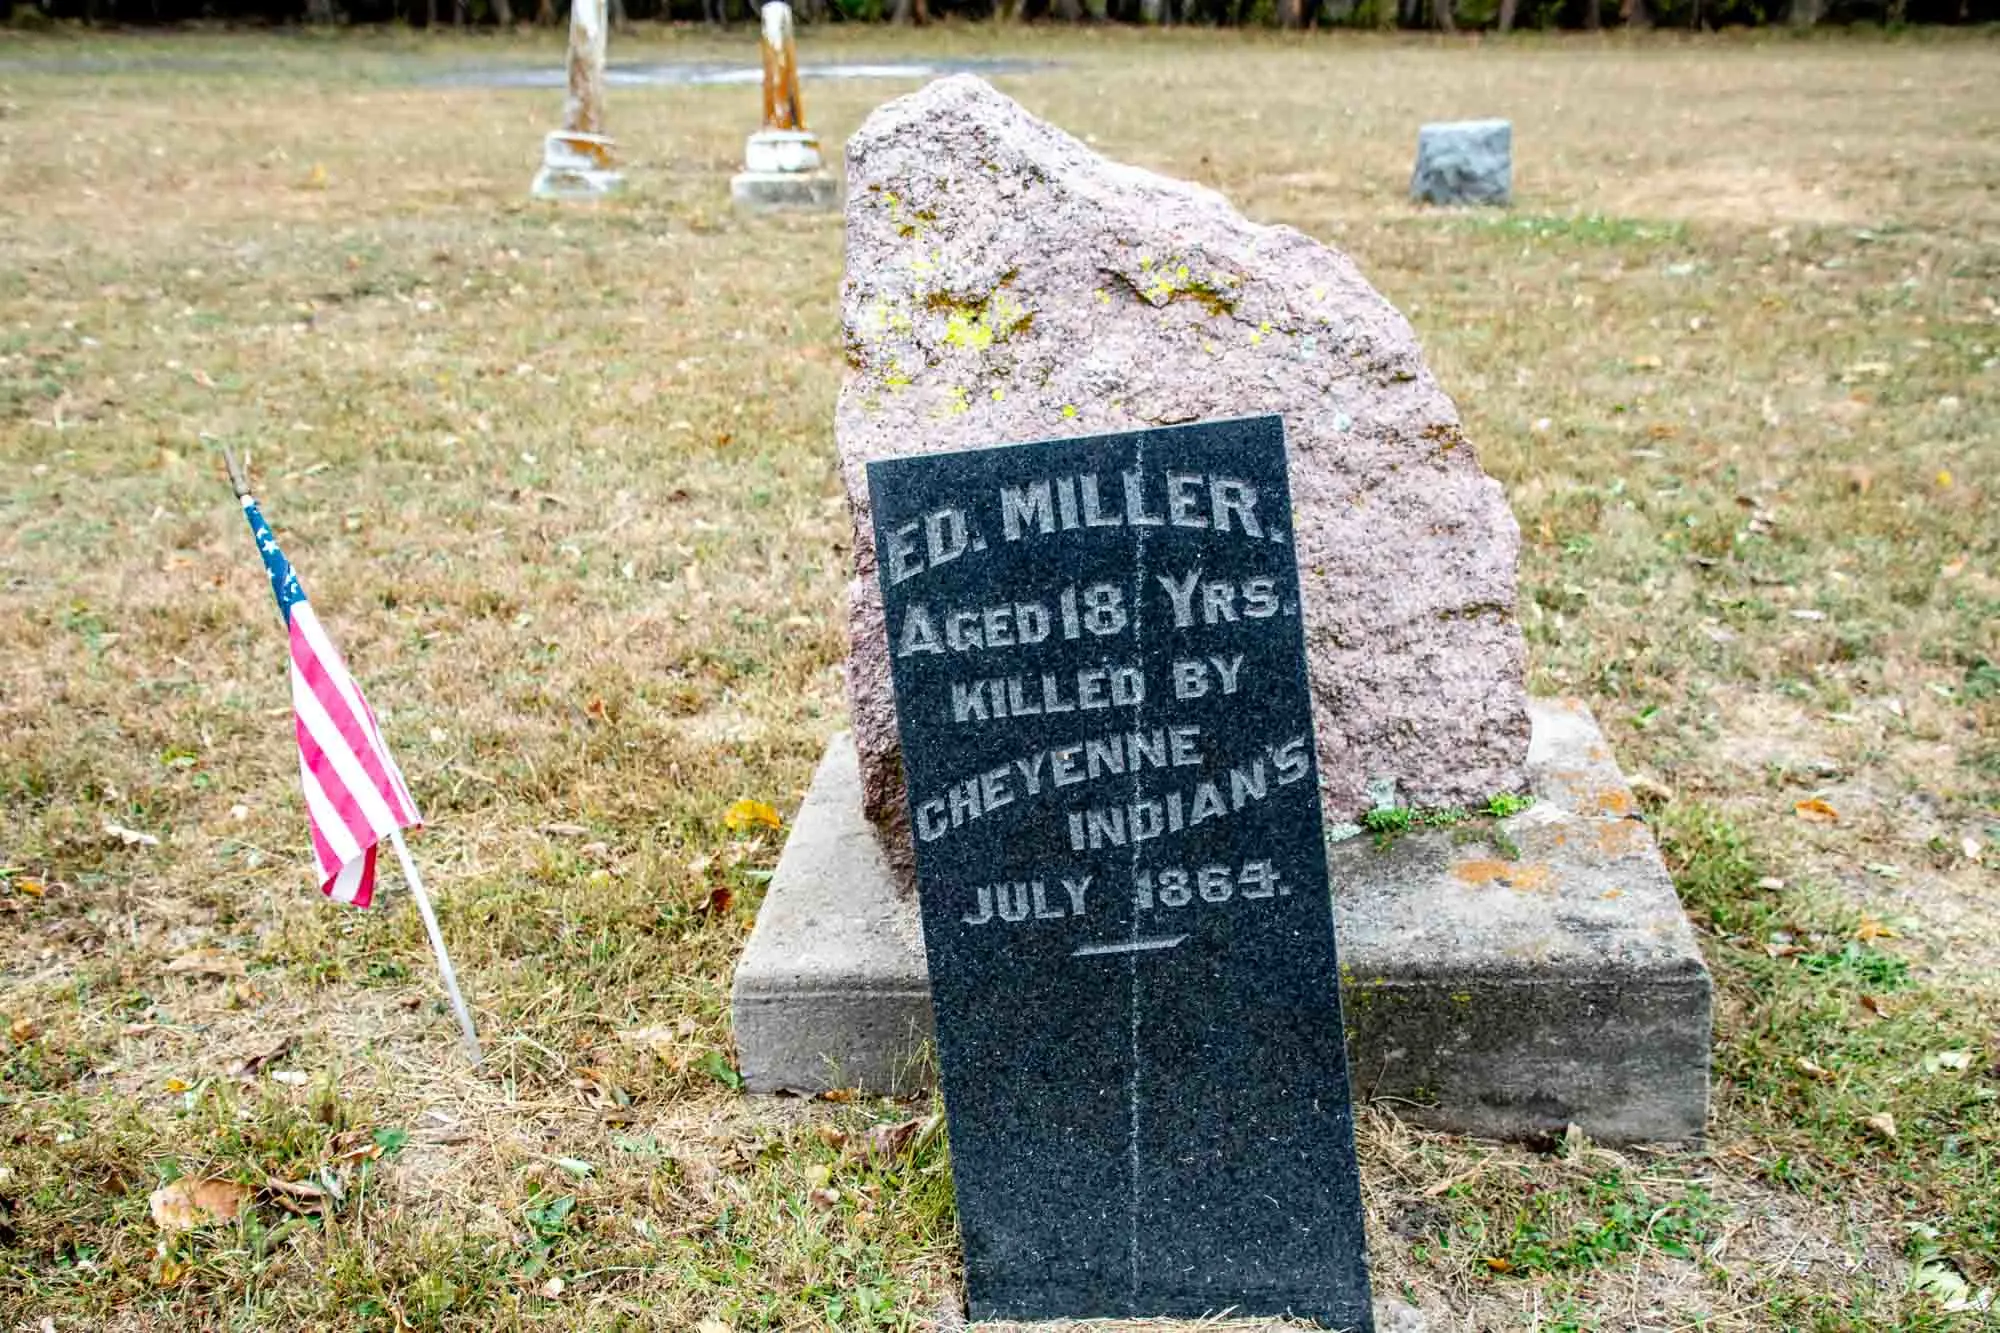 Grave marker reading "Ed. Miller. Aged 18 Yrs. Killed by Cheyenne Indians. July 1864."